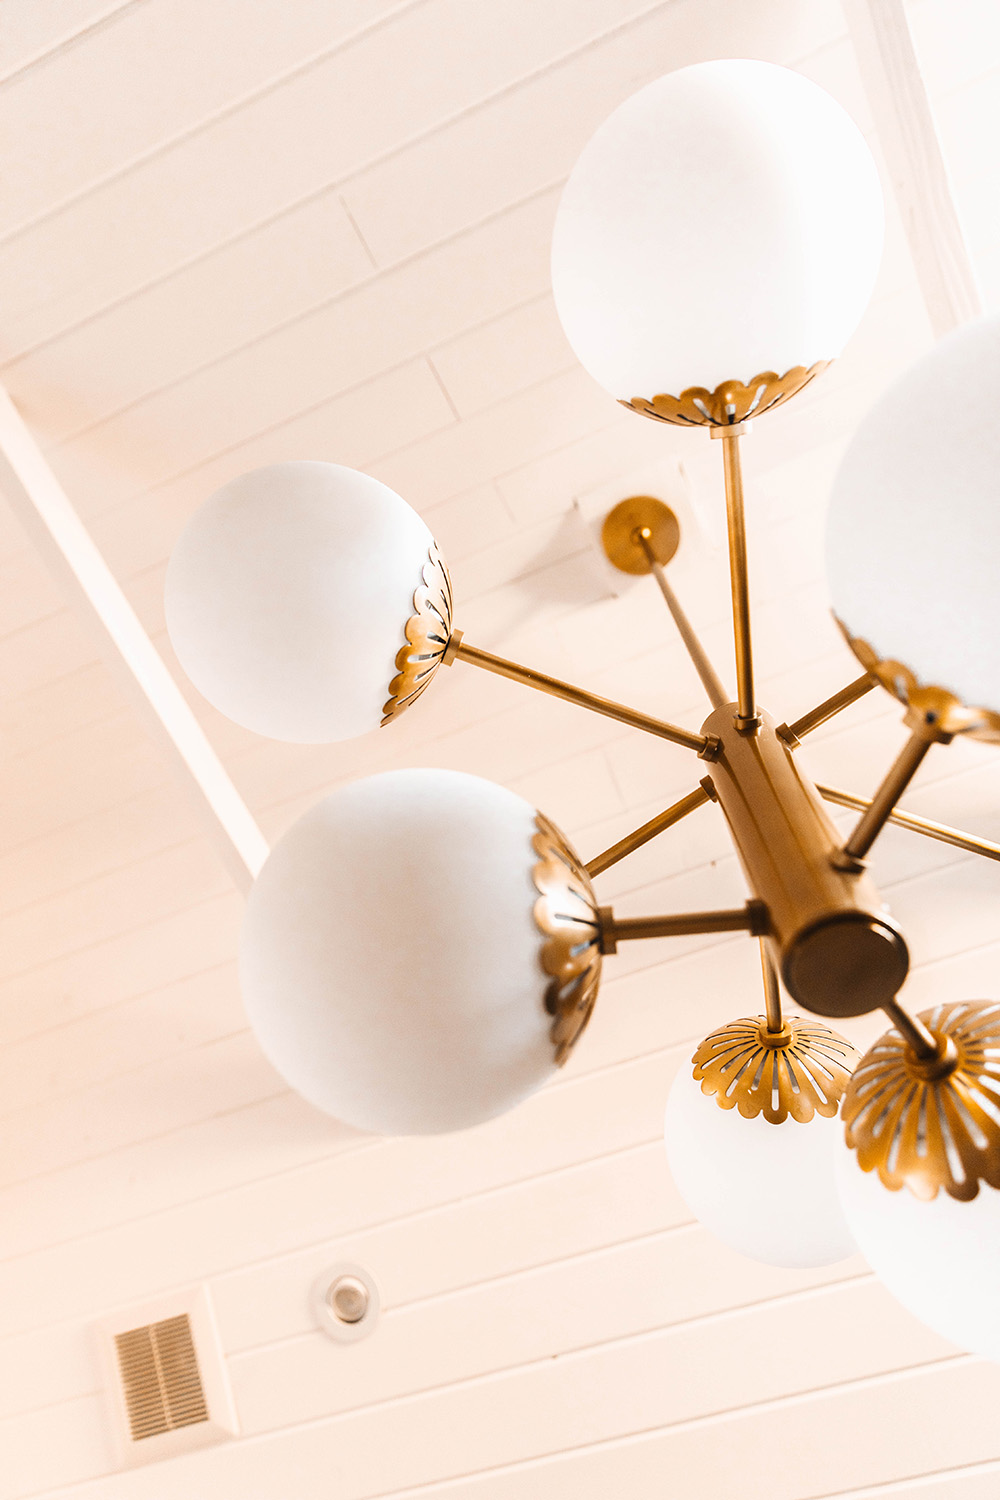 A globe lighting style chandelier hangs from a ceiling.